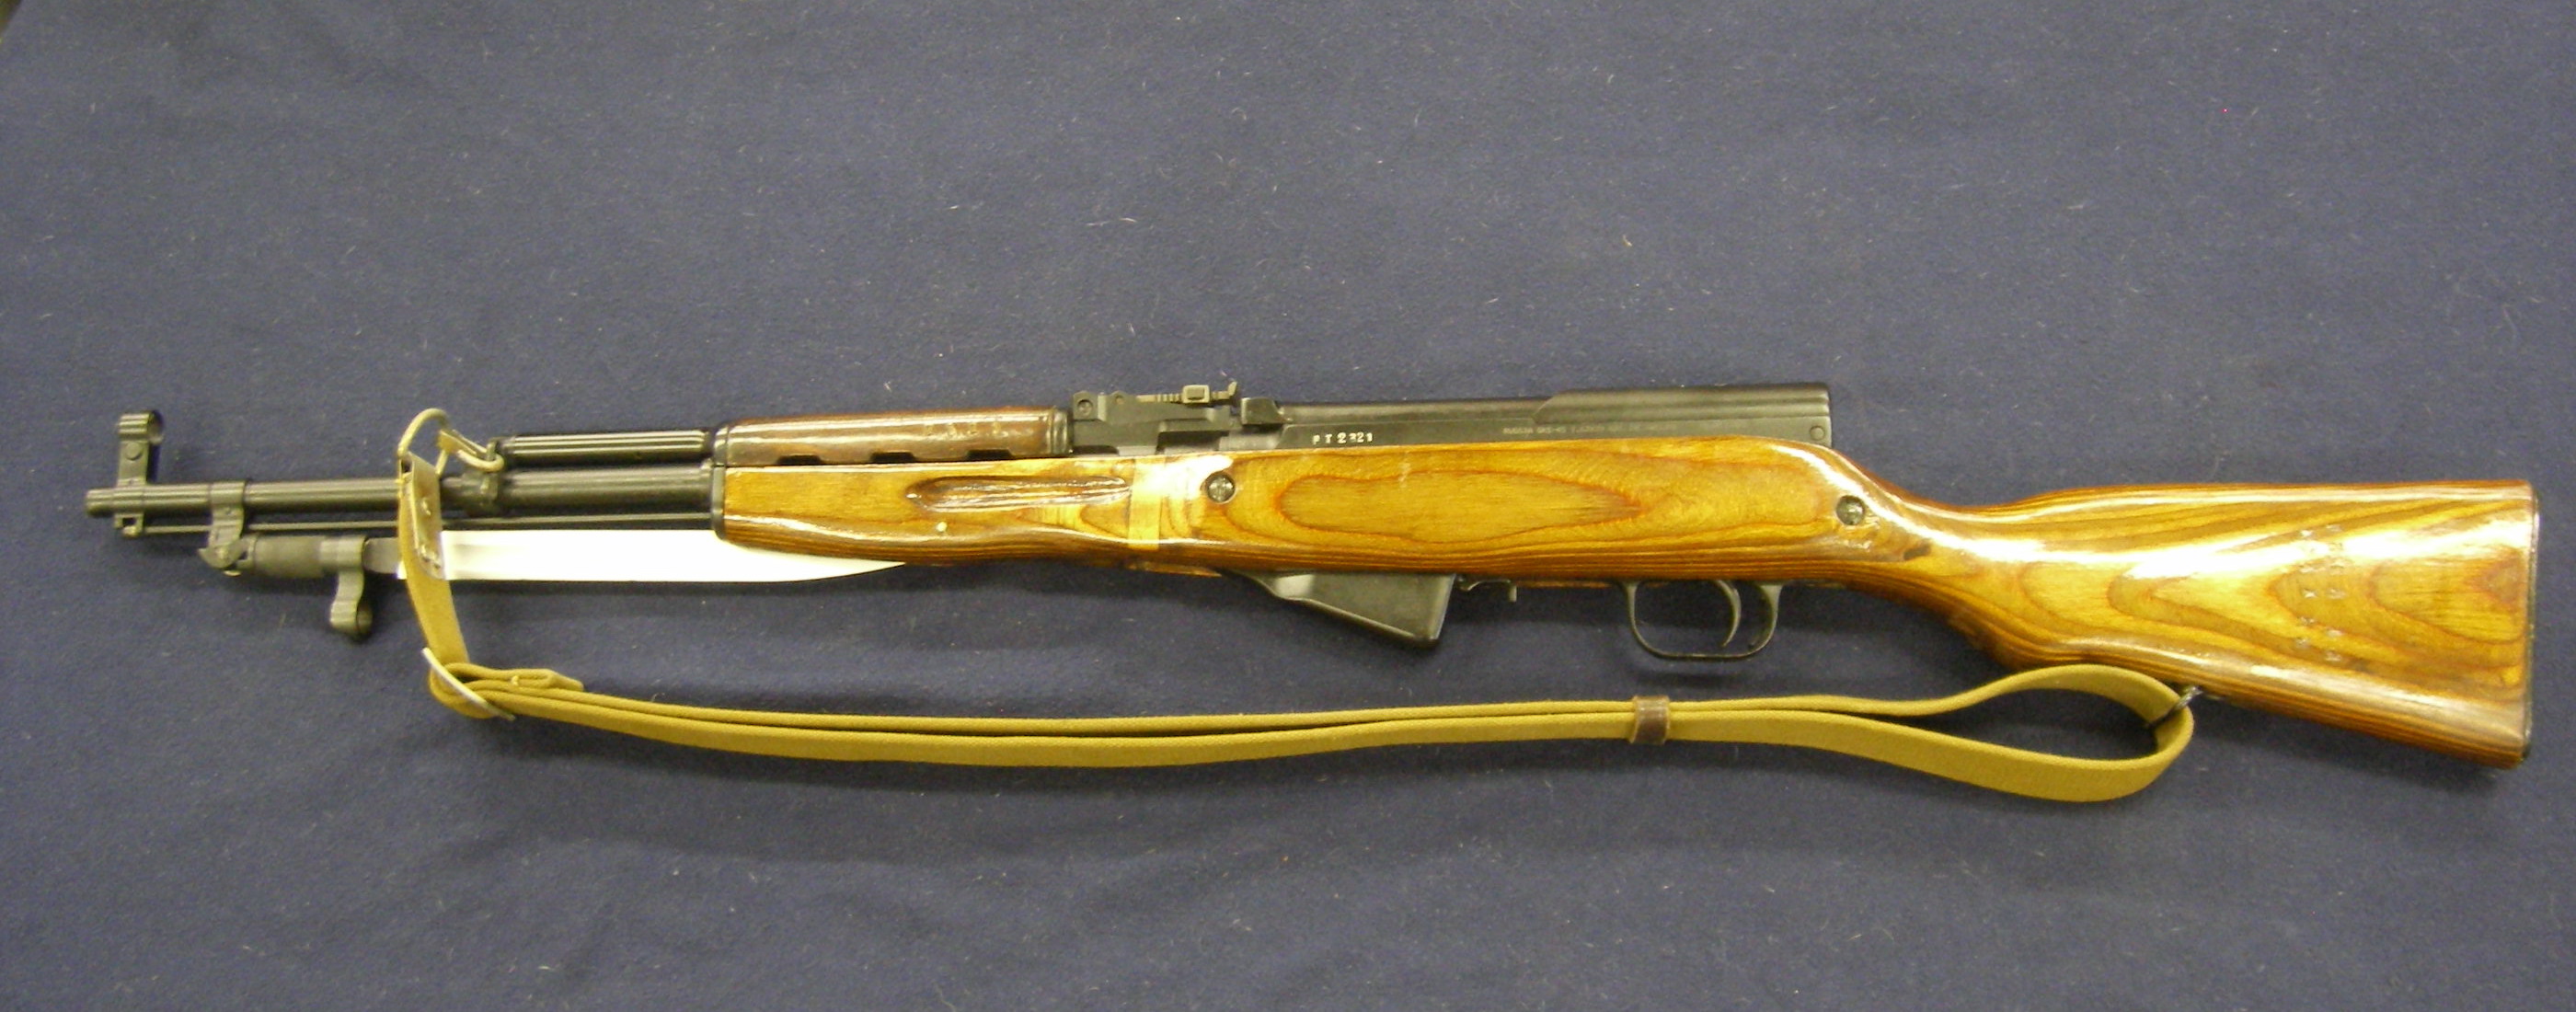 Sks Stock Photos and Images  123RF